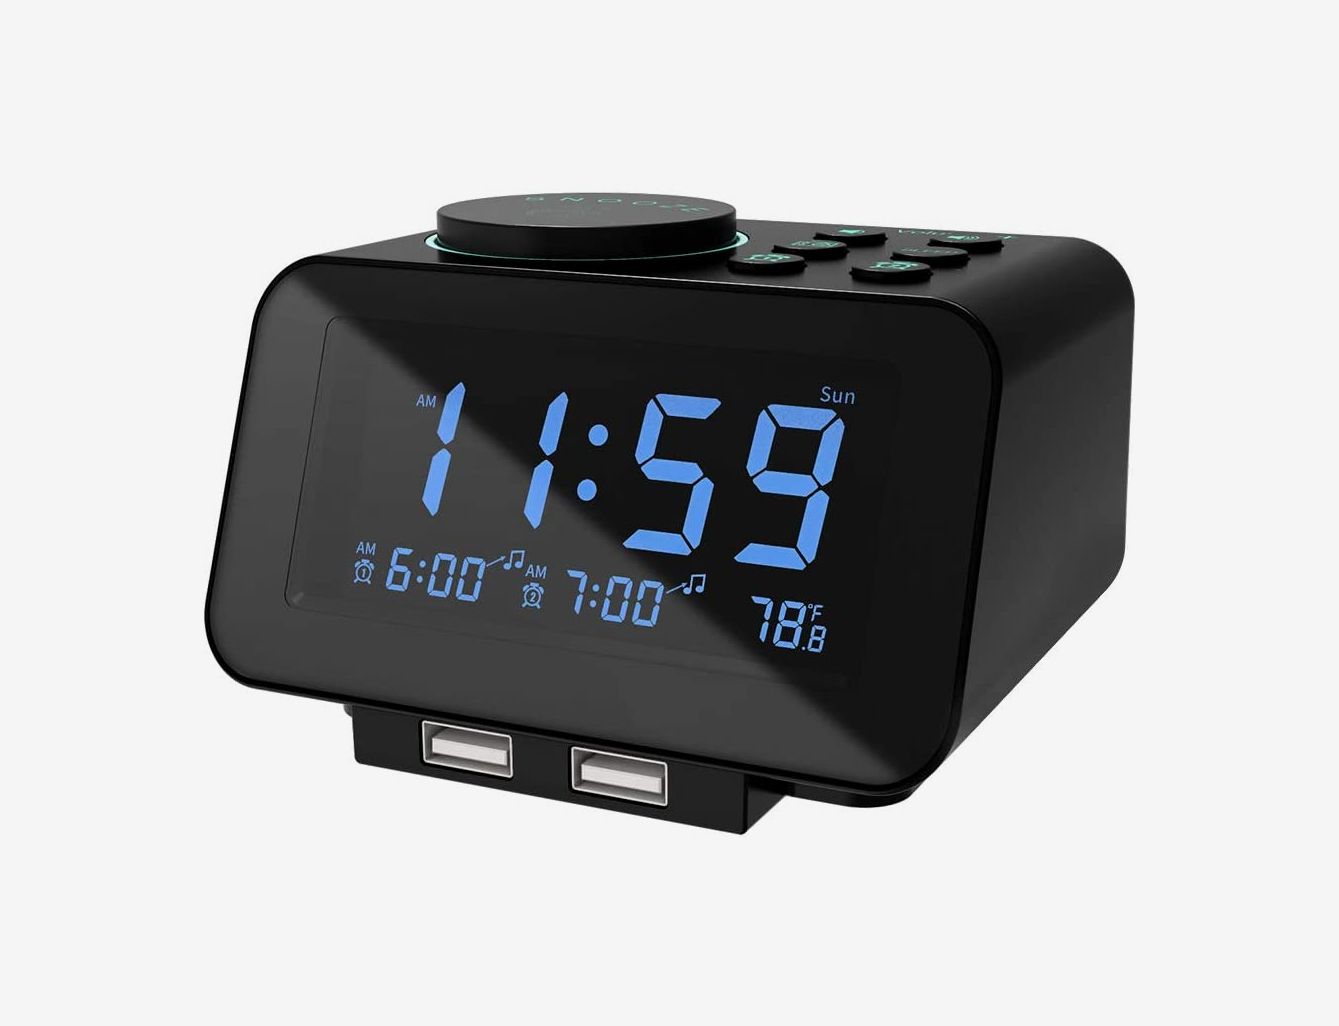 Smiley face Digital Alarm Clock with FM Radio Adjustable Alarm Volume Desk Alarm Clock,2 USB Charge Ports Large LED Display Time Temperature USB or Battery Operated 